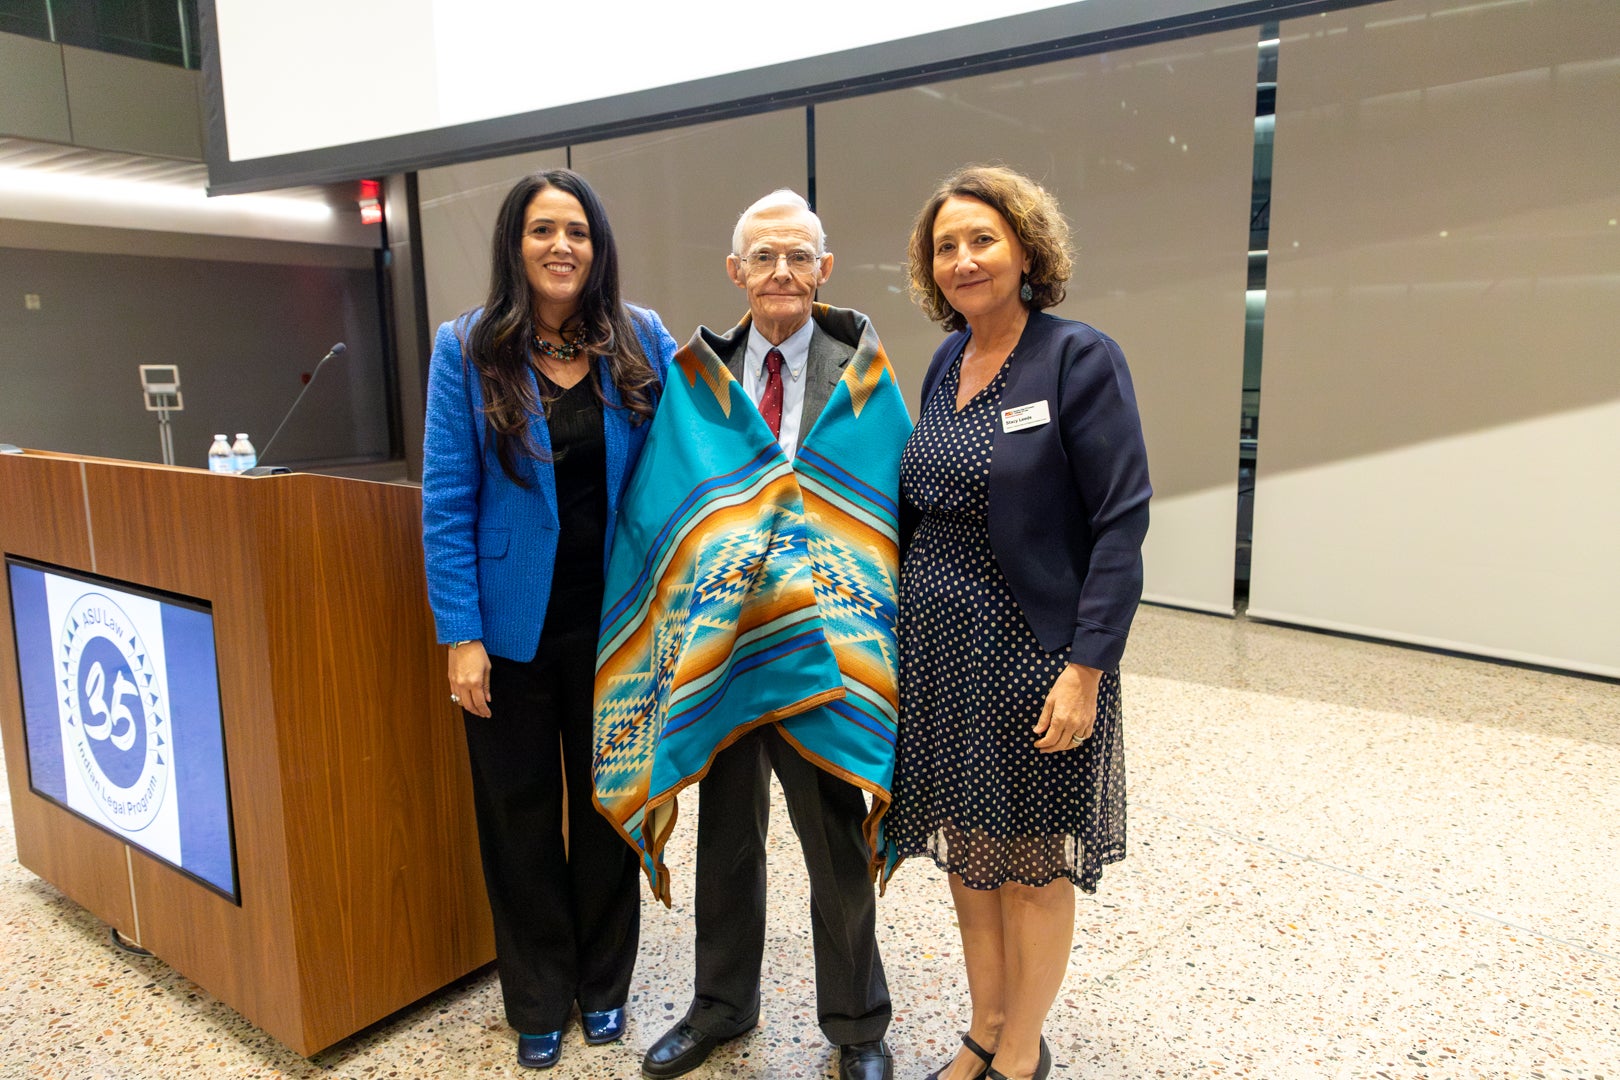 William Canby standing with Dean Leeds and Patty Ferguson-Bohnee during the annual William C. Canby Jr. Lecture. during the 